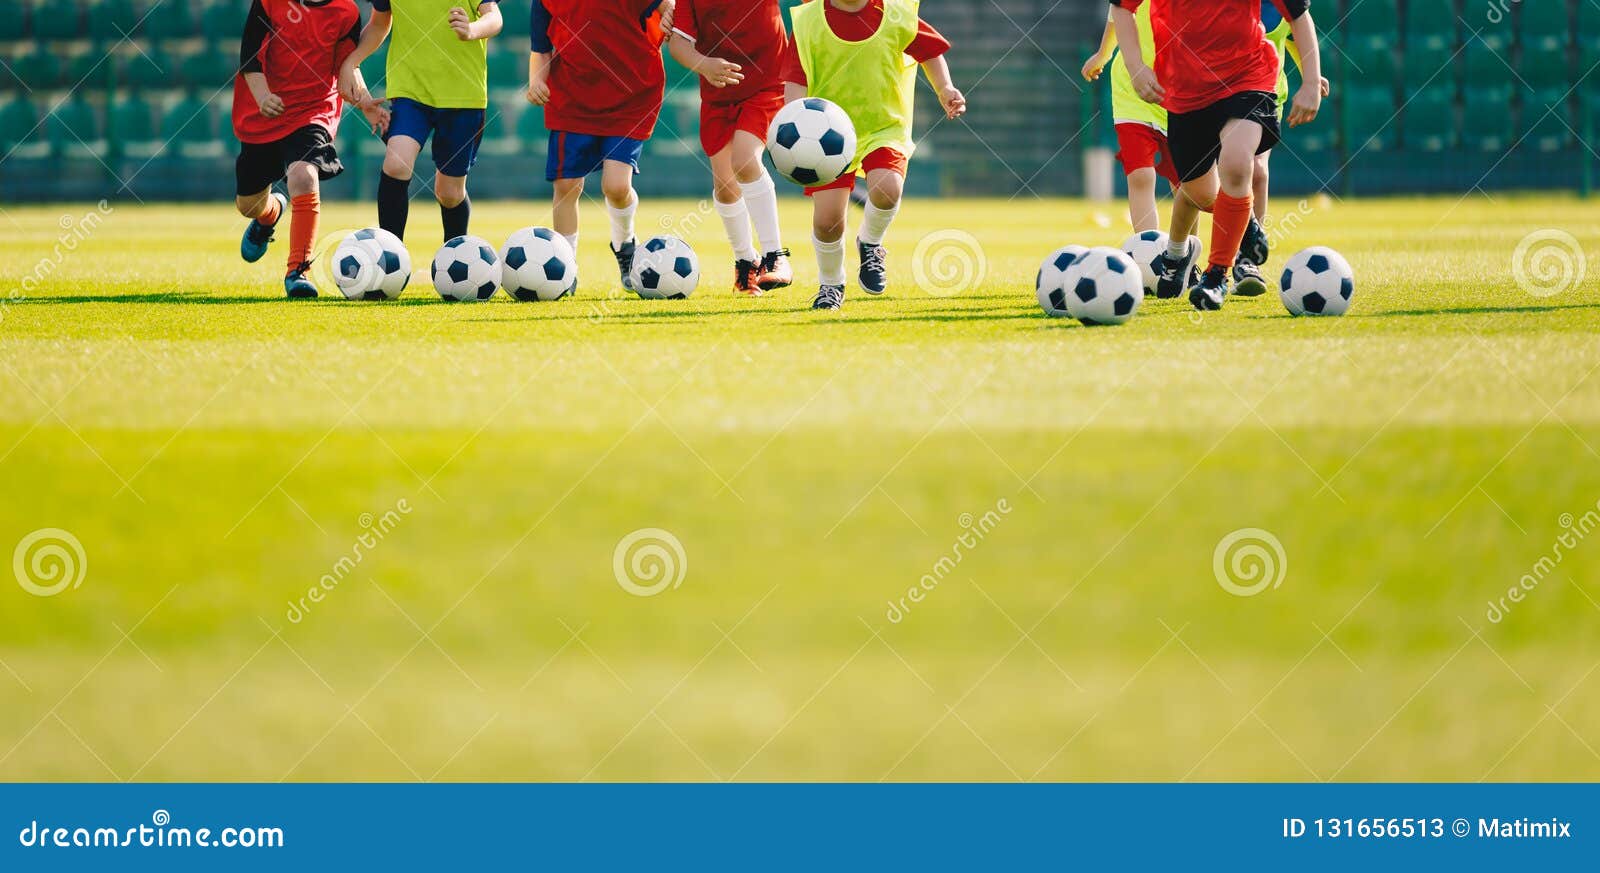 children play soccer at grass sports field. football training for kids. children running and kicking soccer balls at soccer pitch